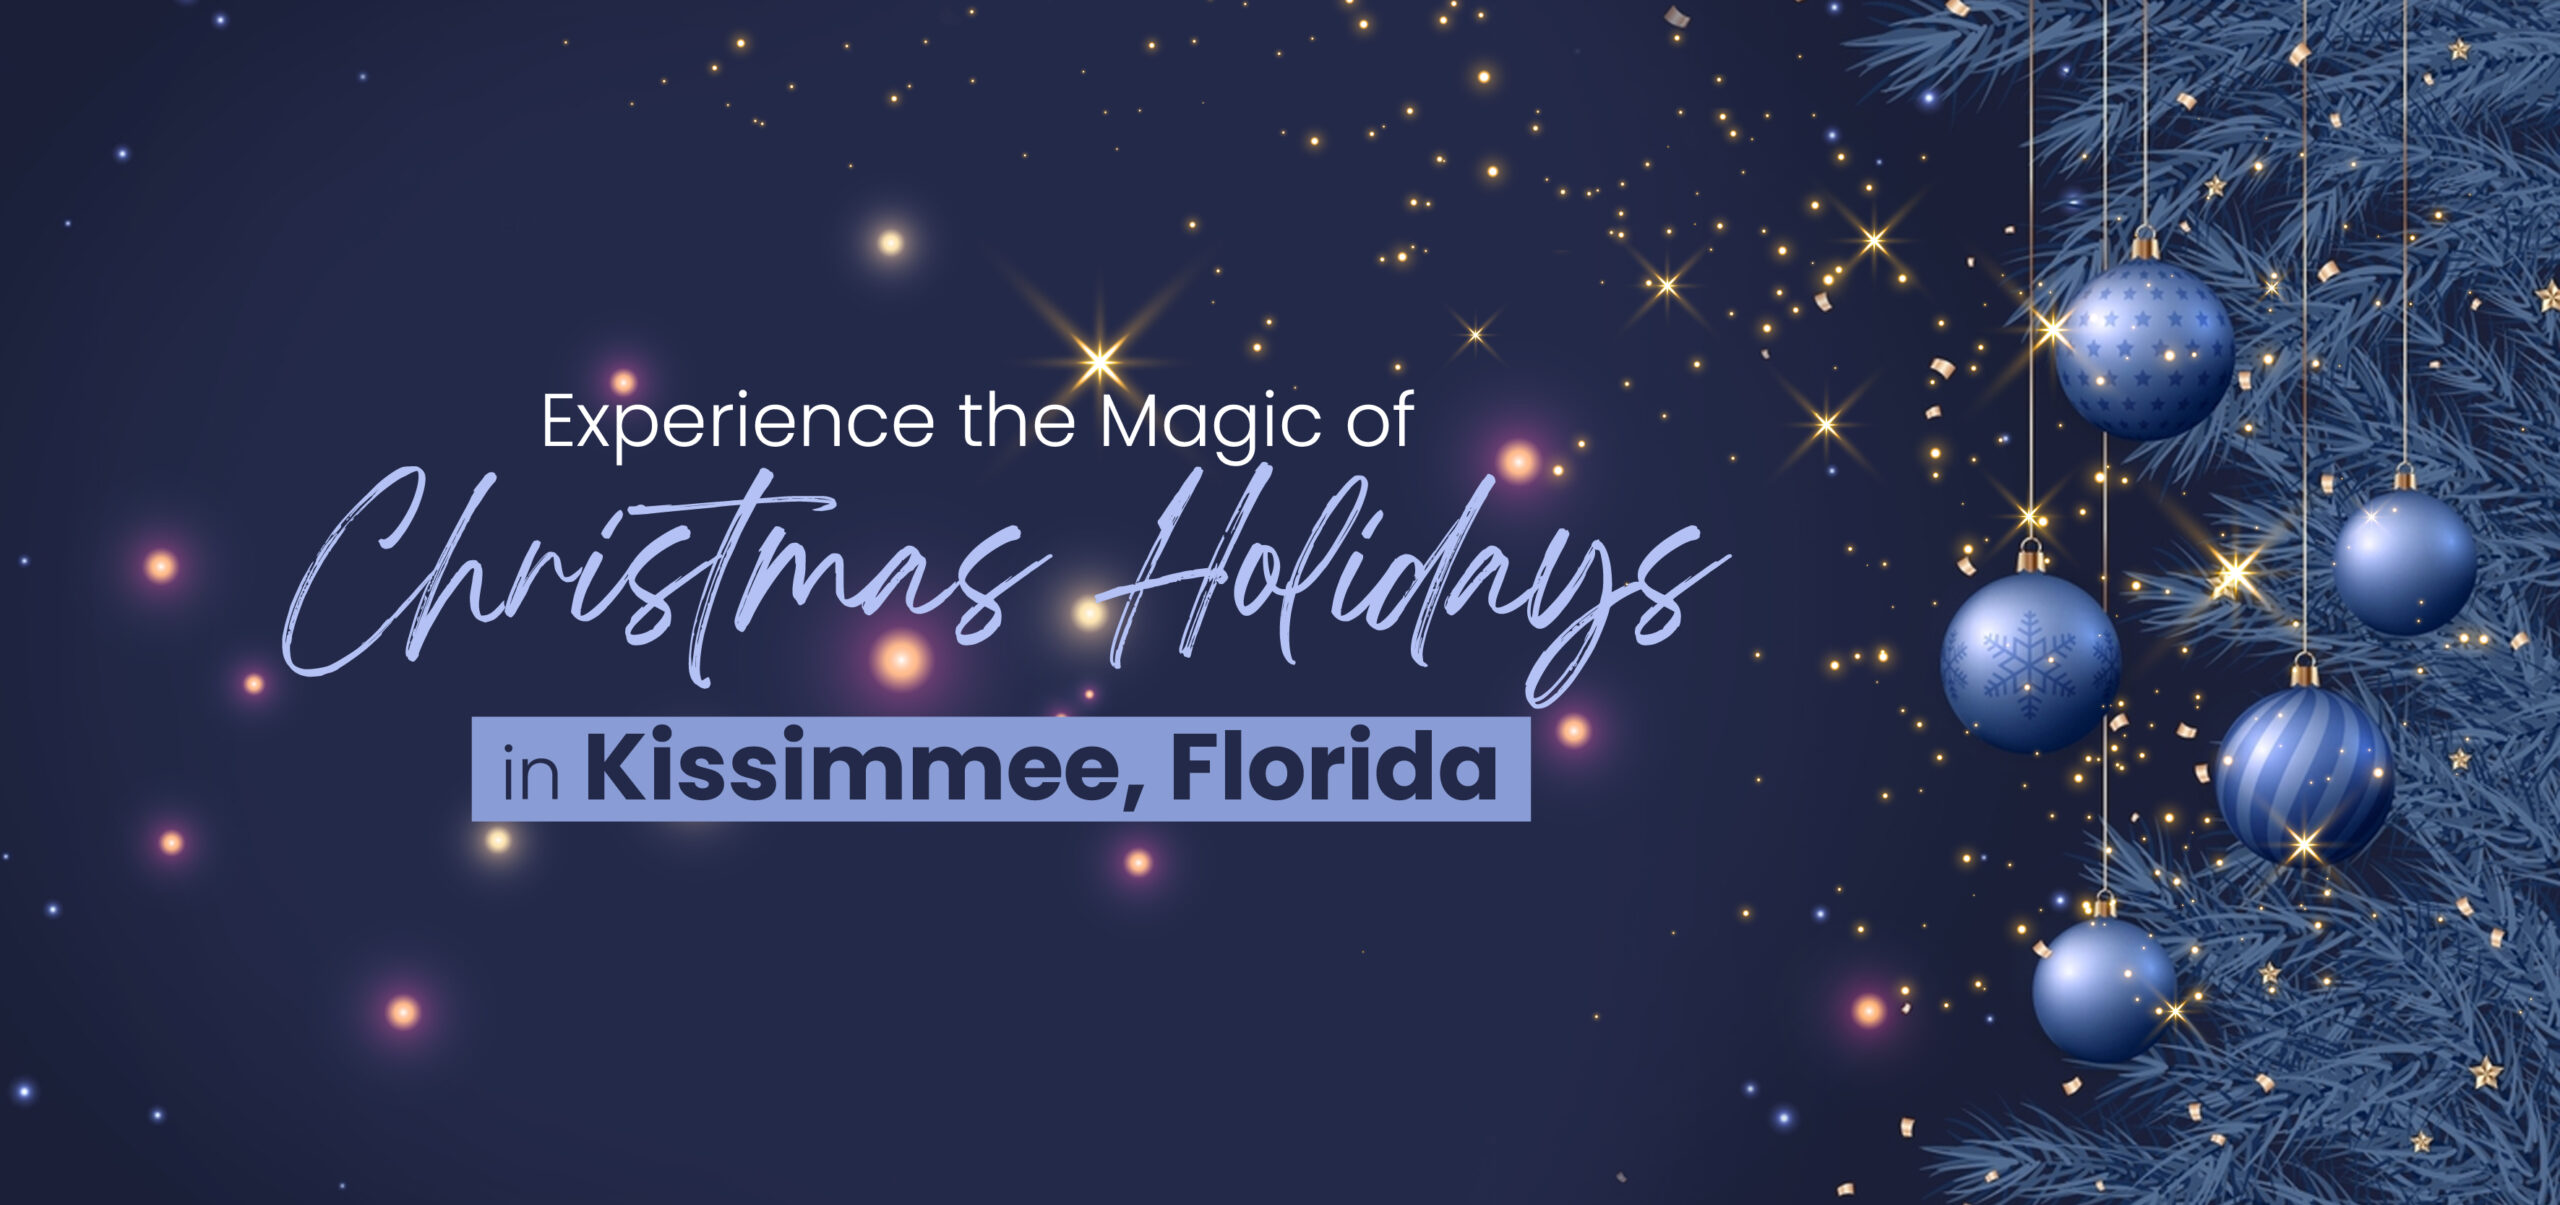 Experience the Magic of Christmas Holidays in Kissimmee, Florida: Best Things to Do